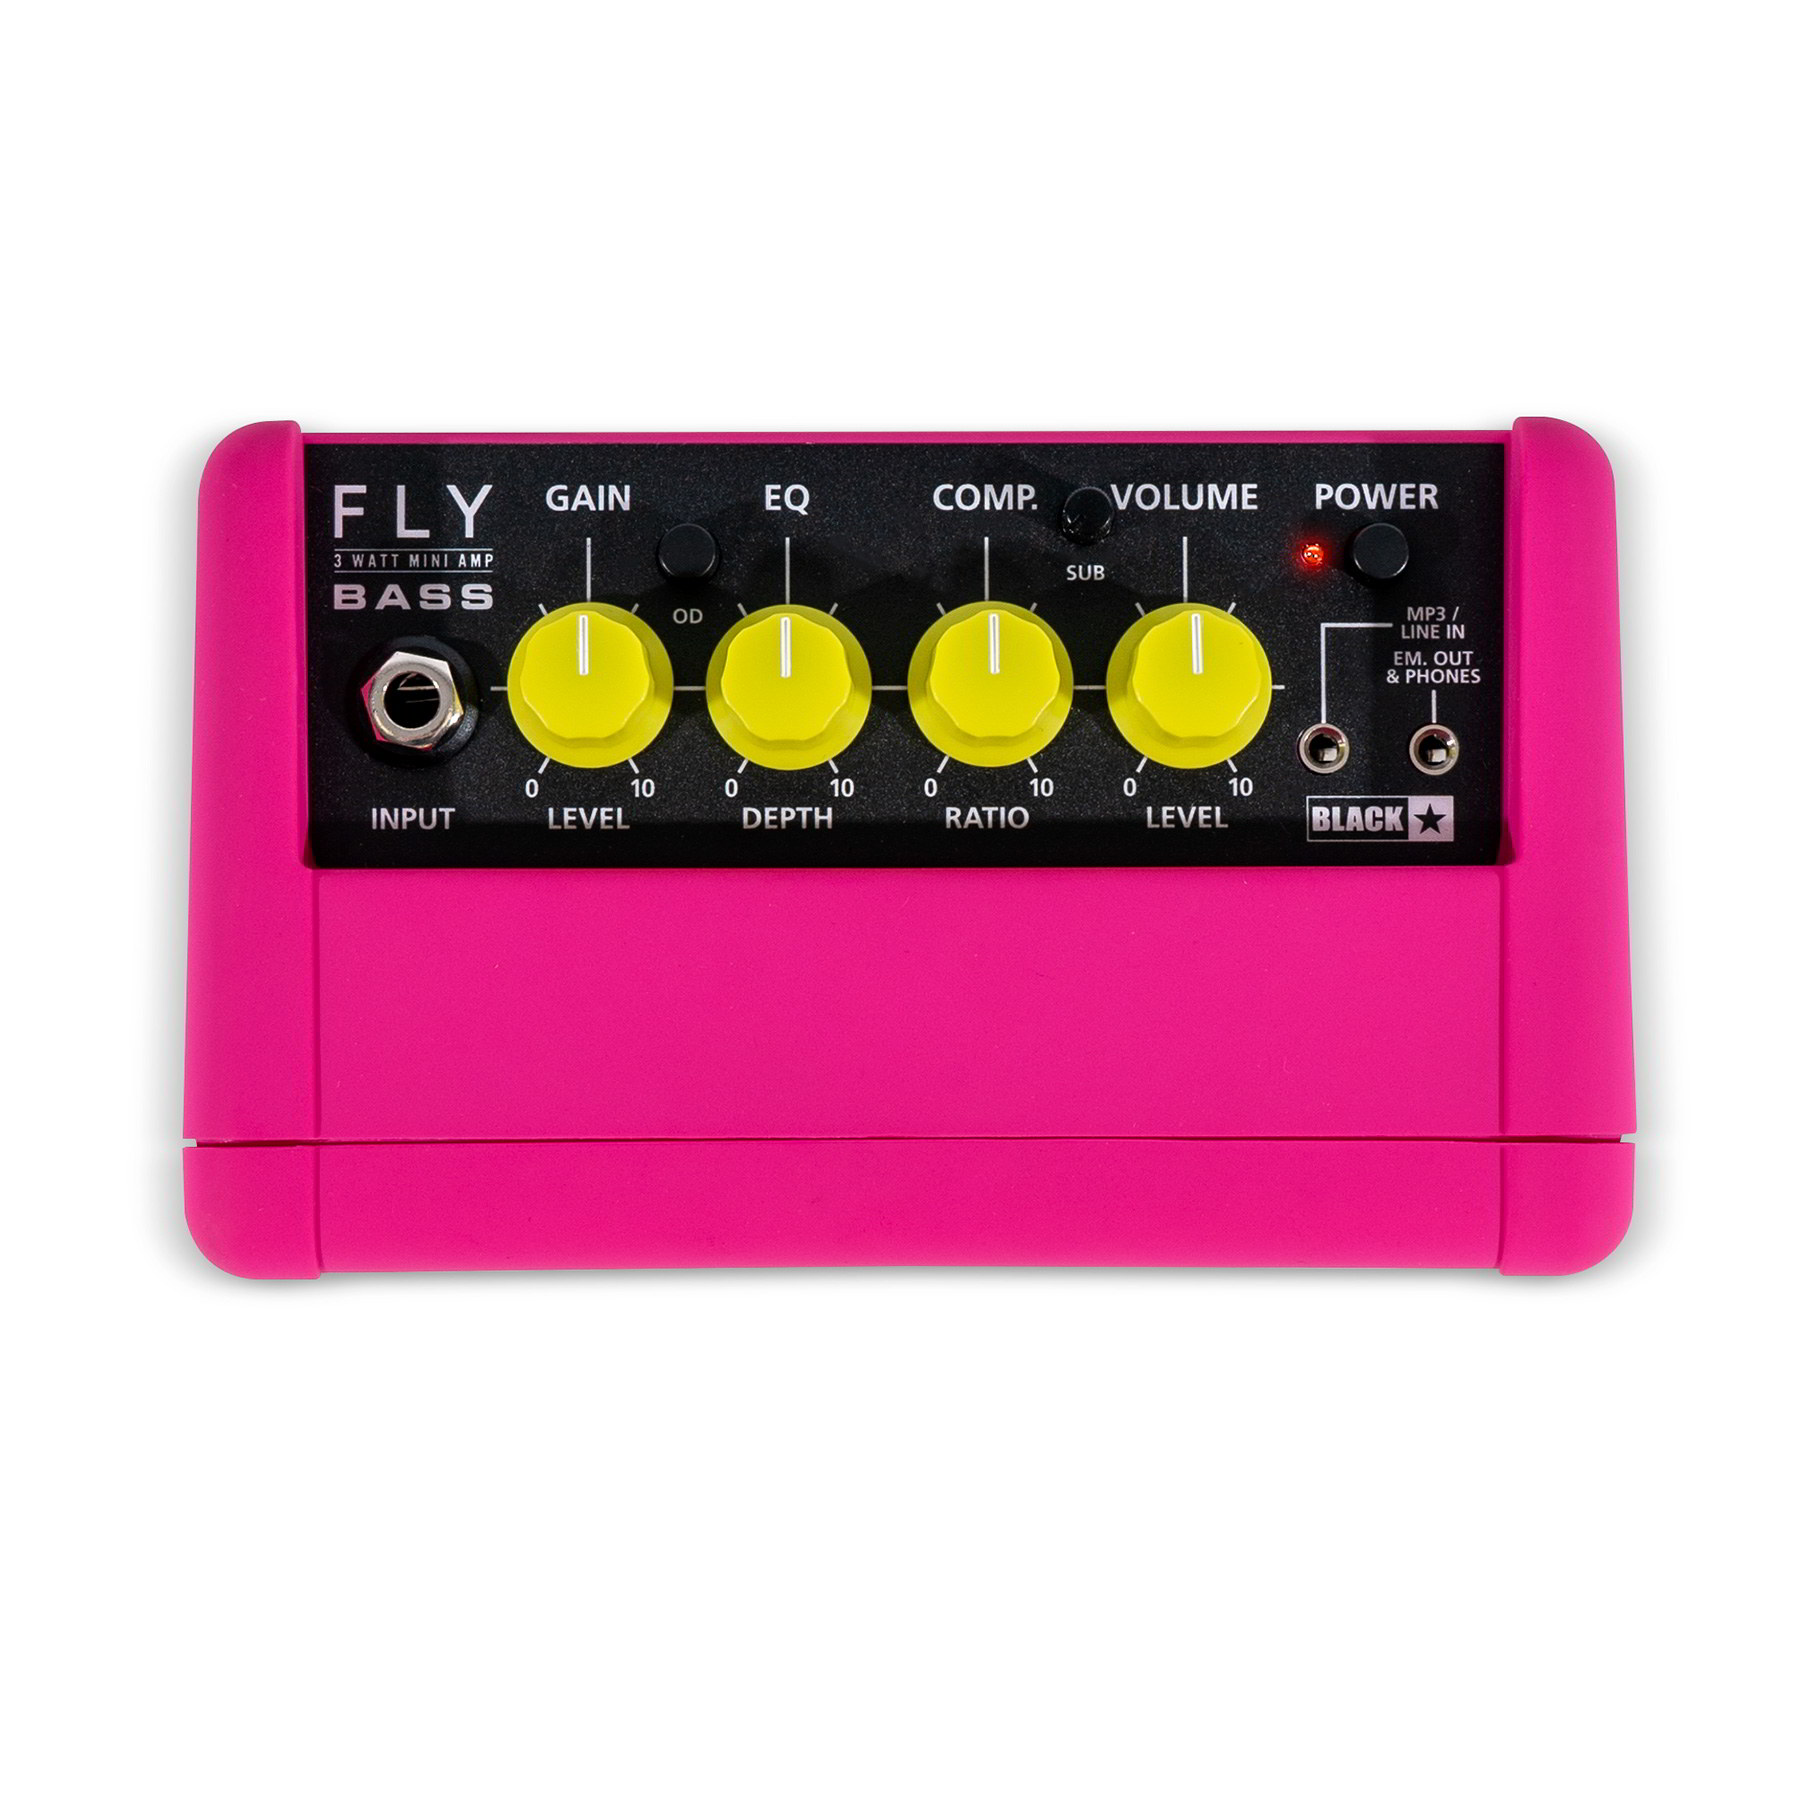 FLY 3 Bass NEON PINKパネル画像